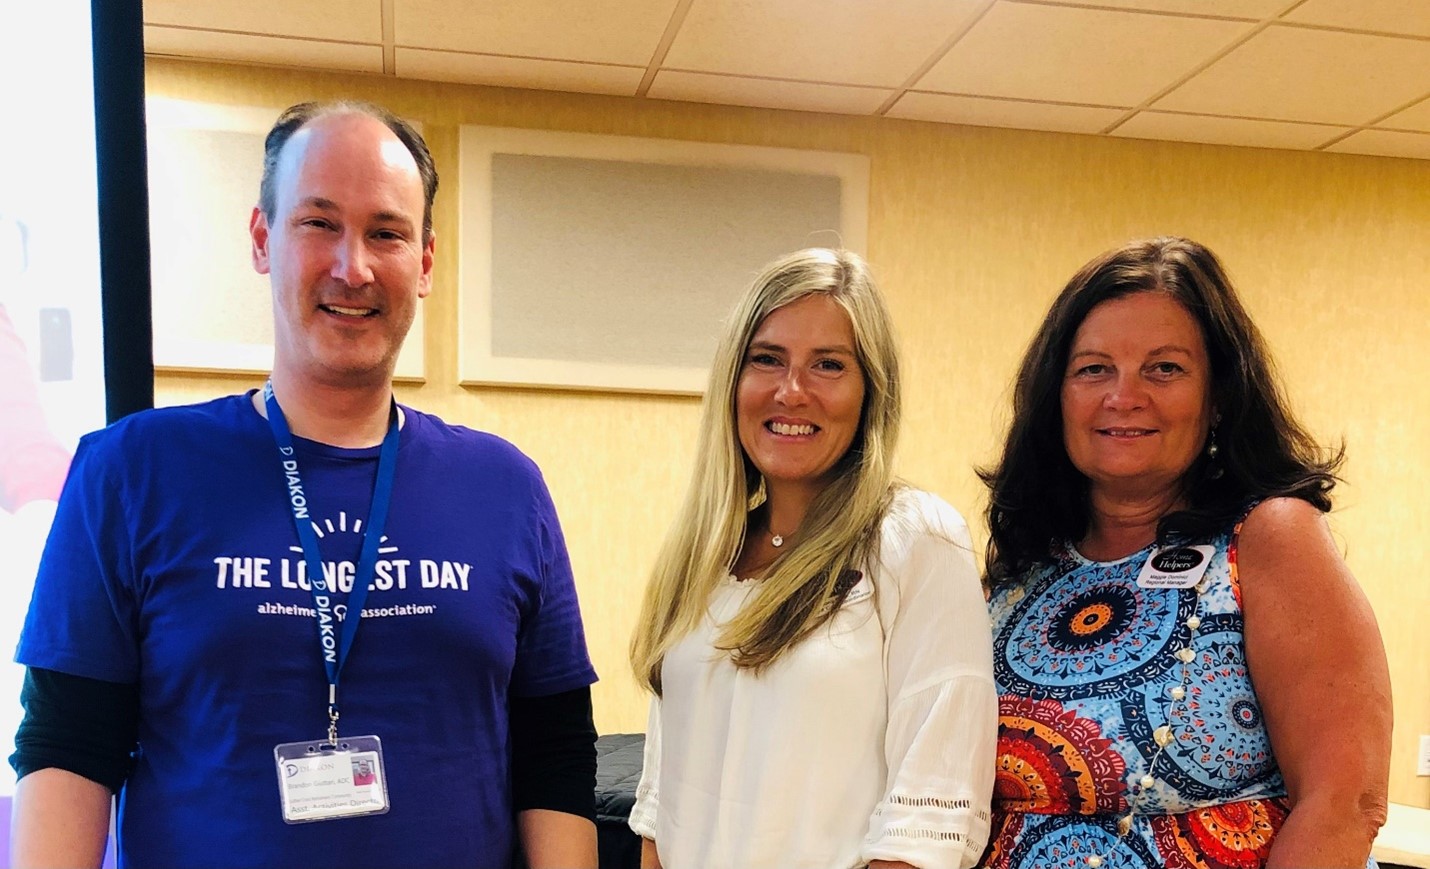 Home Helpers’ Lehigh Valley Management team, including Nurse Care Manager, Meloy Horn, RN (center) and Maggie Dominici, Regional Manager (right) are pictured along with a representative of Luther Crest Continuing Care Retirement Community in Allentown, Pa